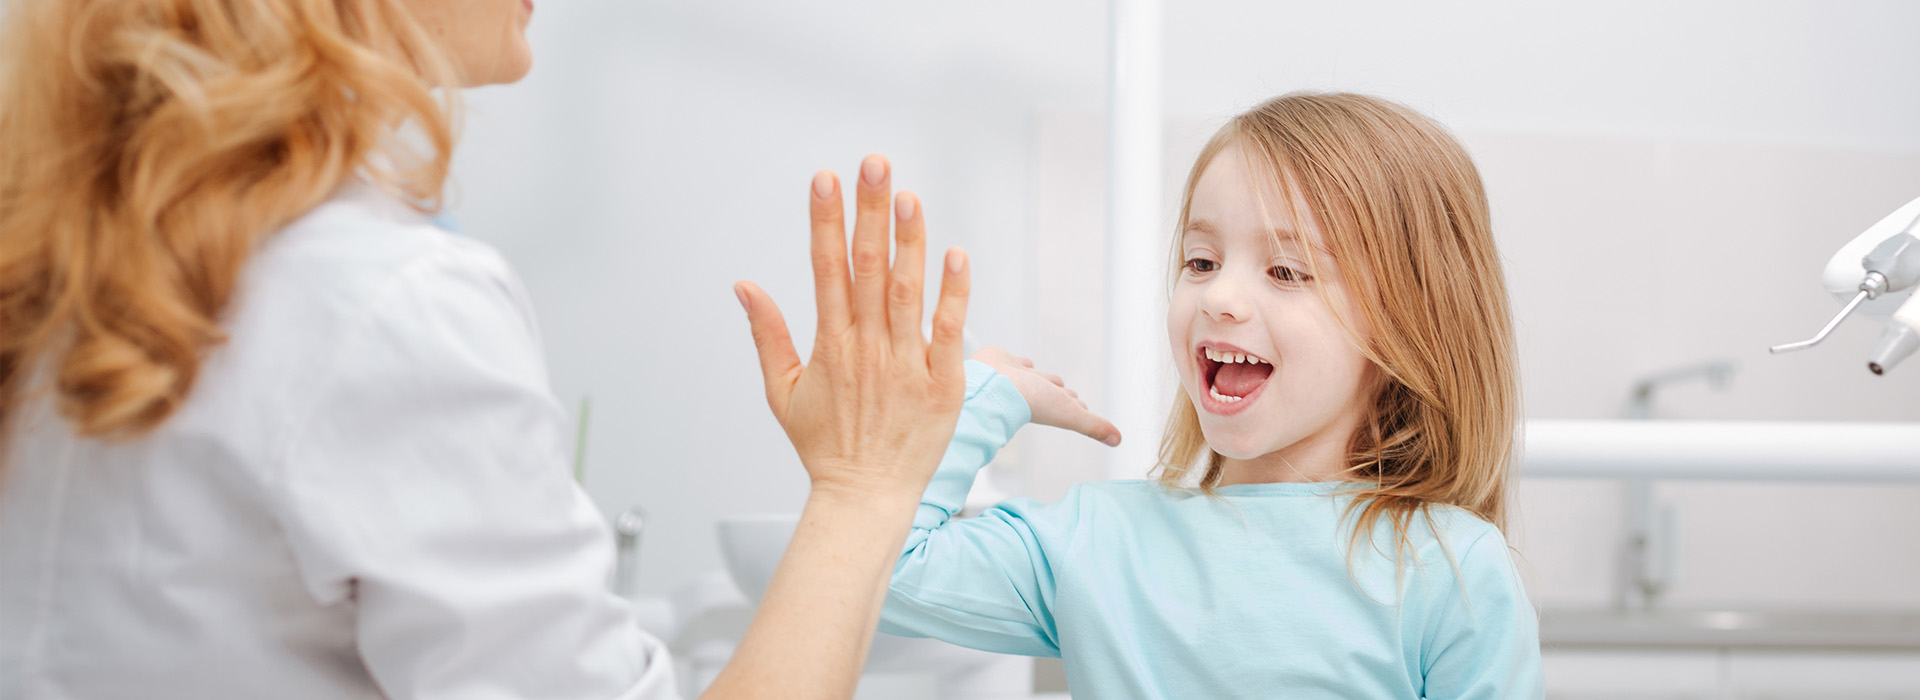 A young child with blonde hair is high-fiving a woman in a medical setting, both are smiling.